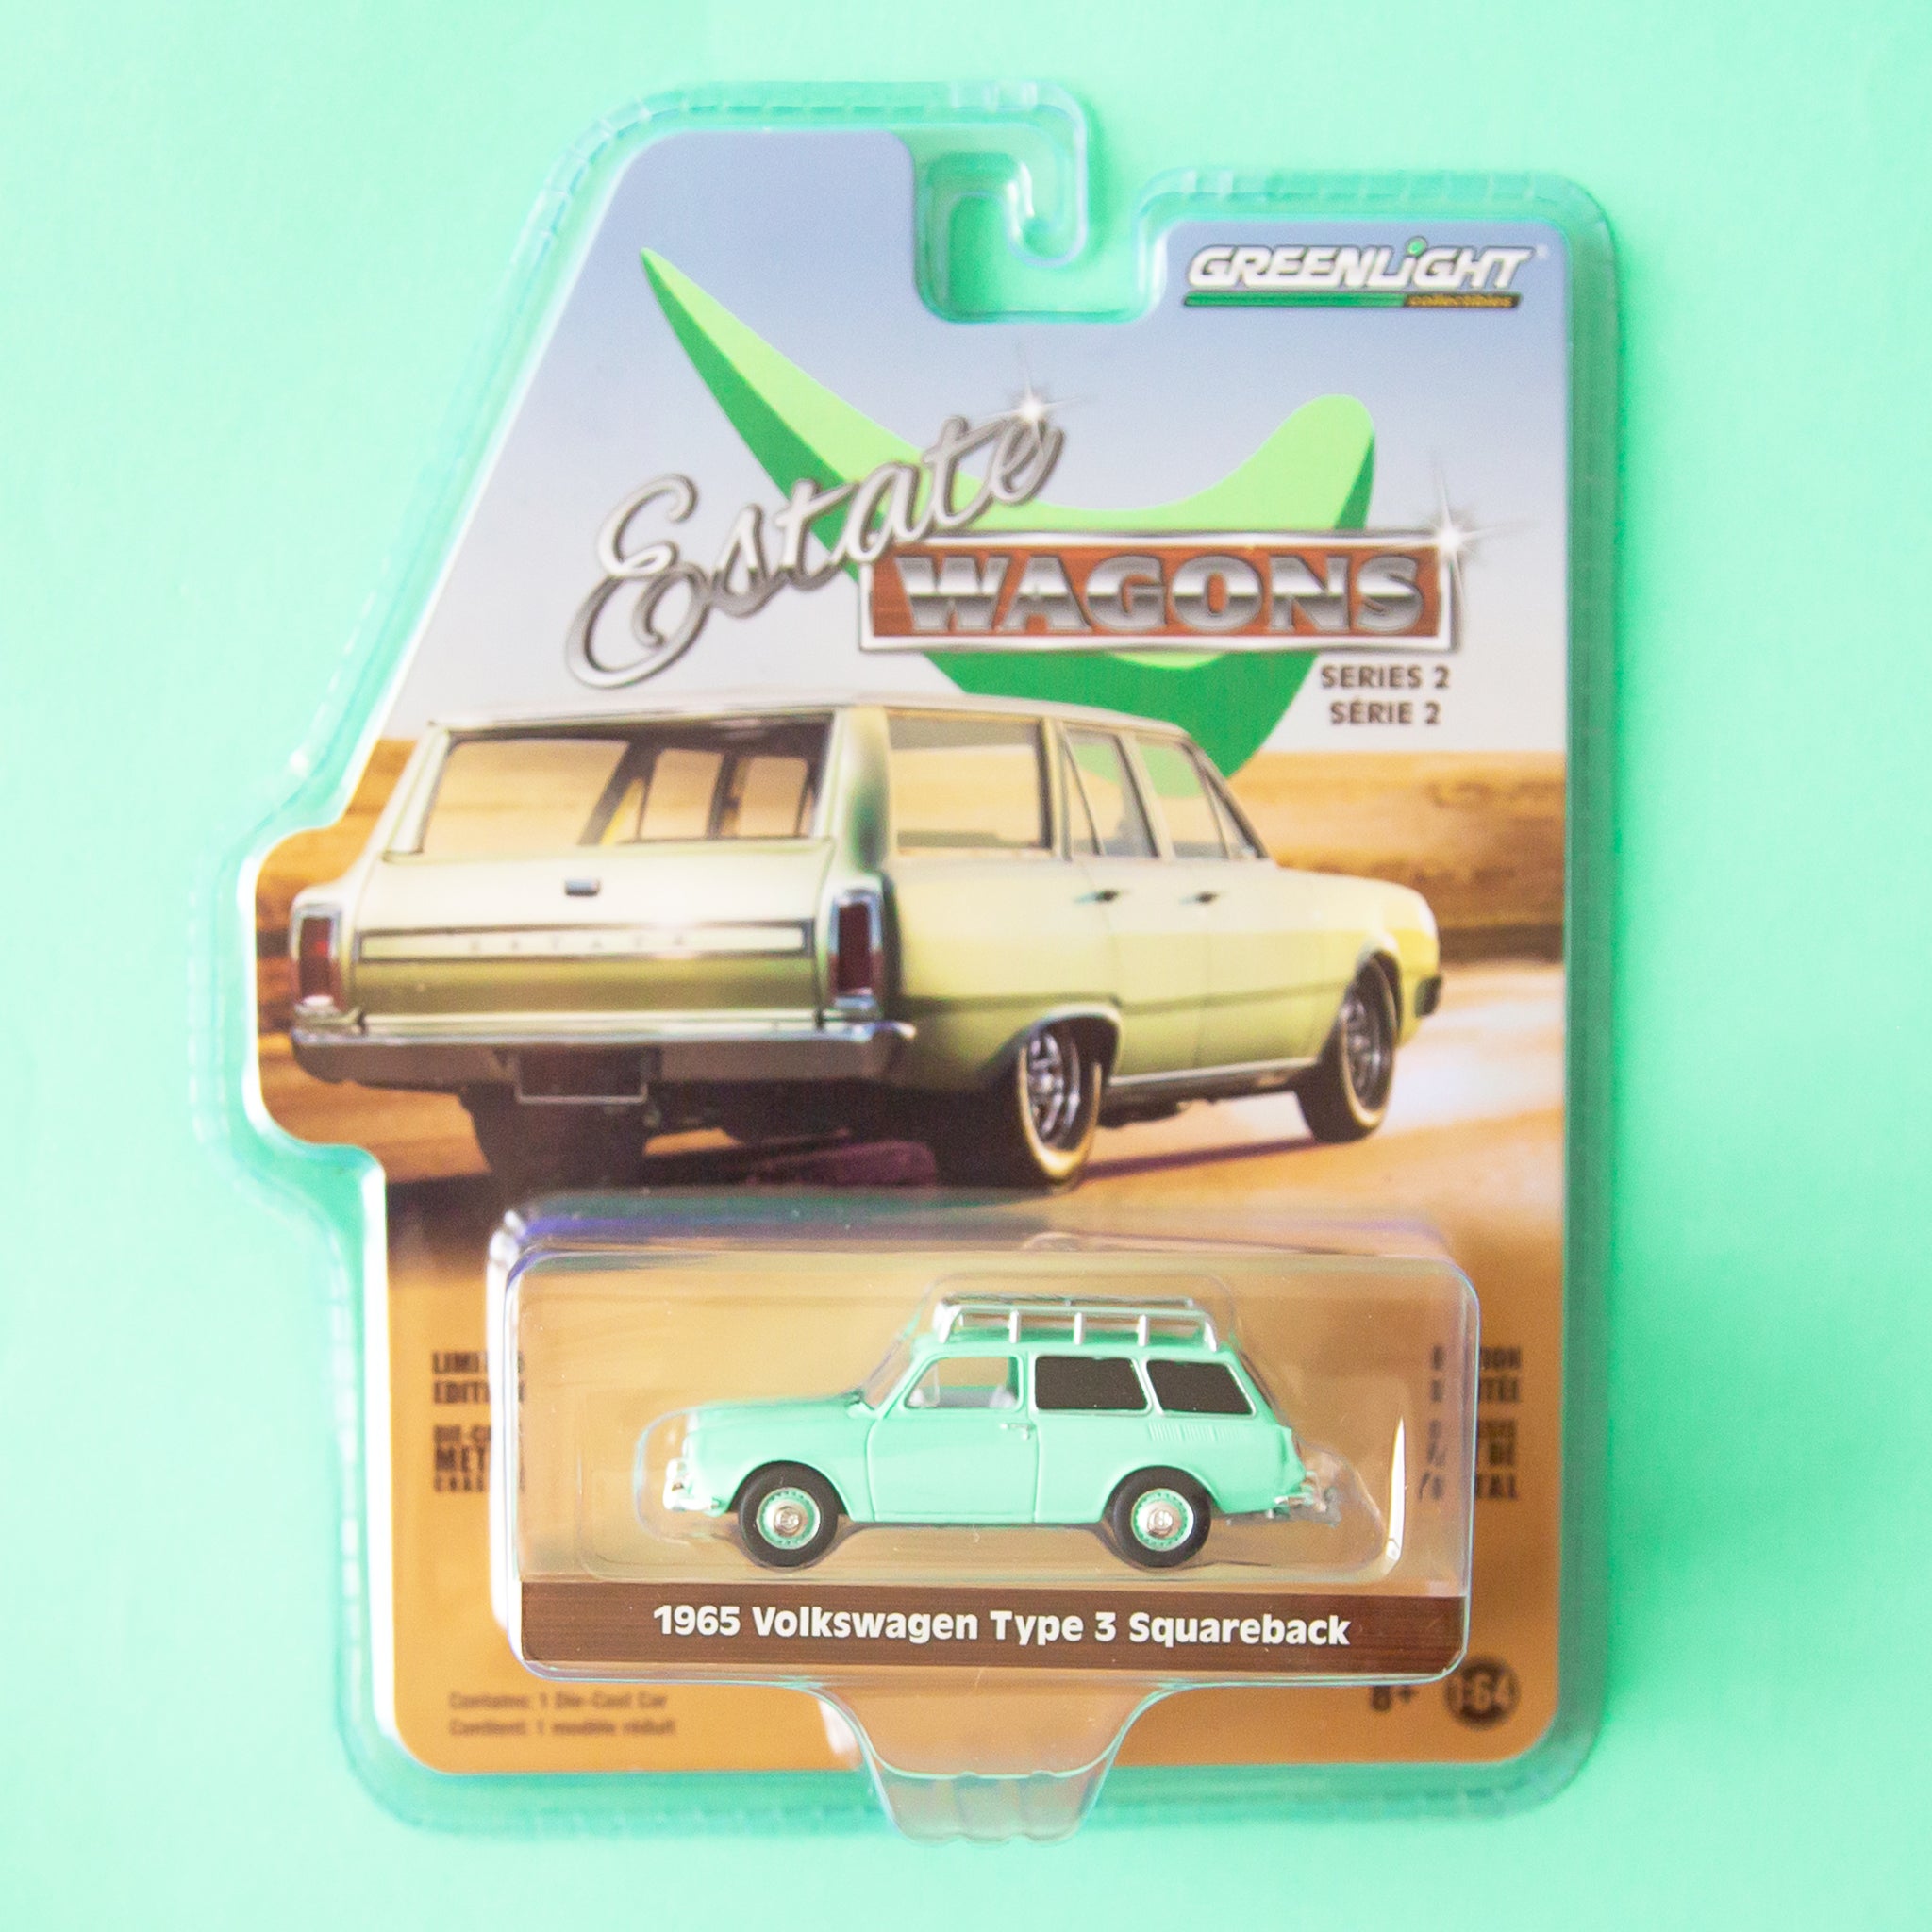 A green station wagon toy car in the packaging. 